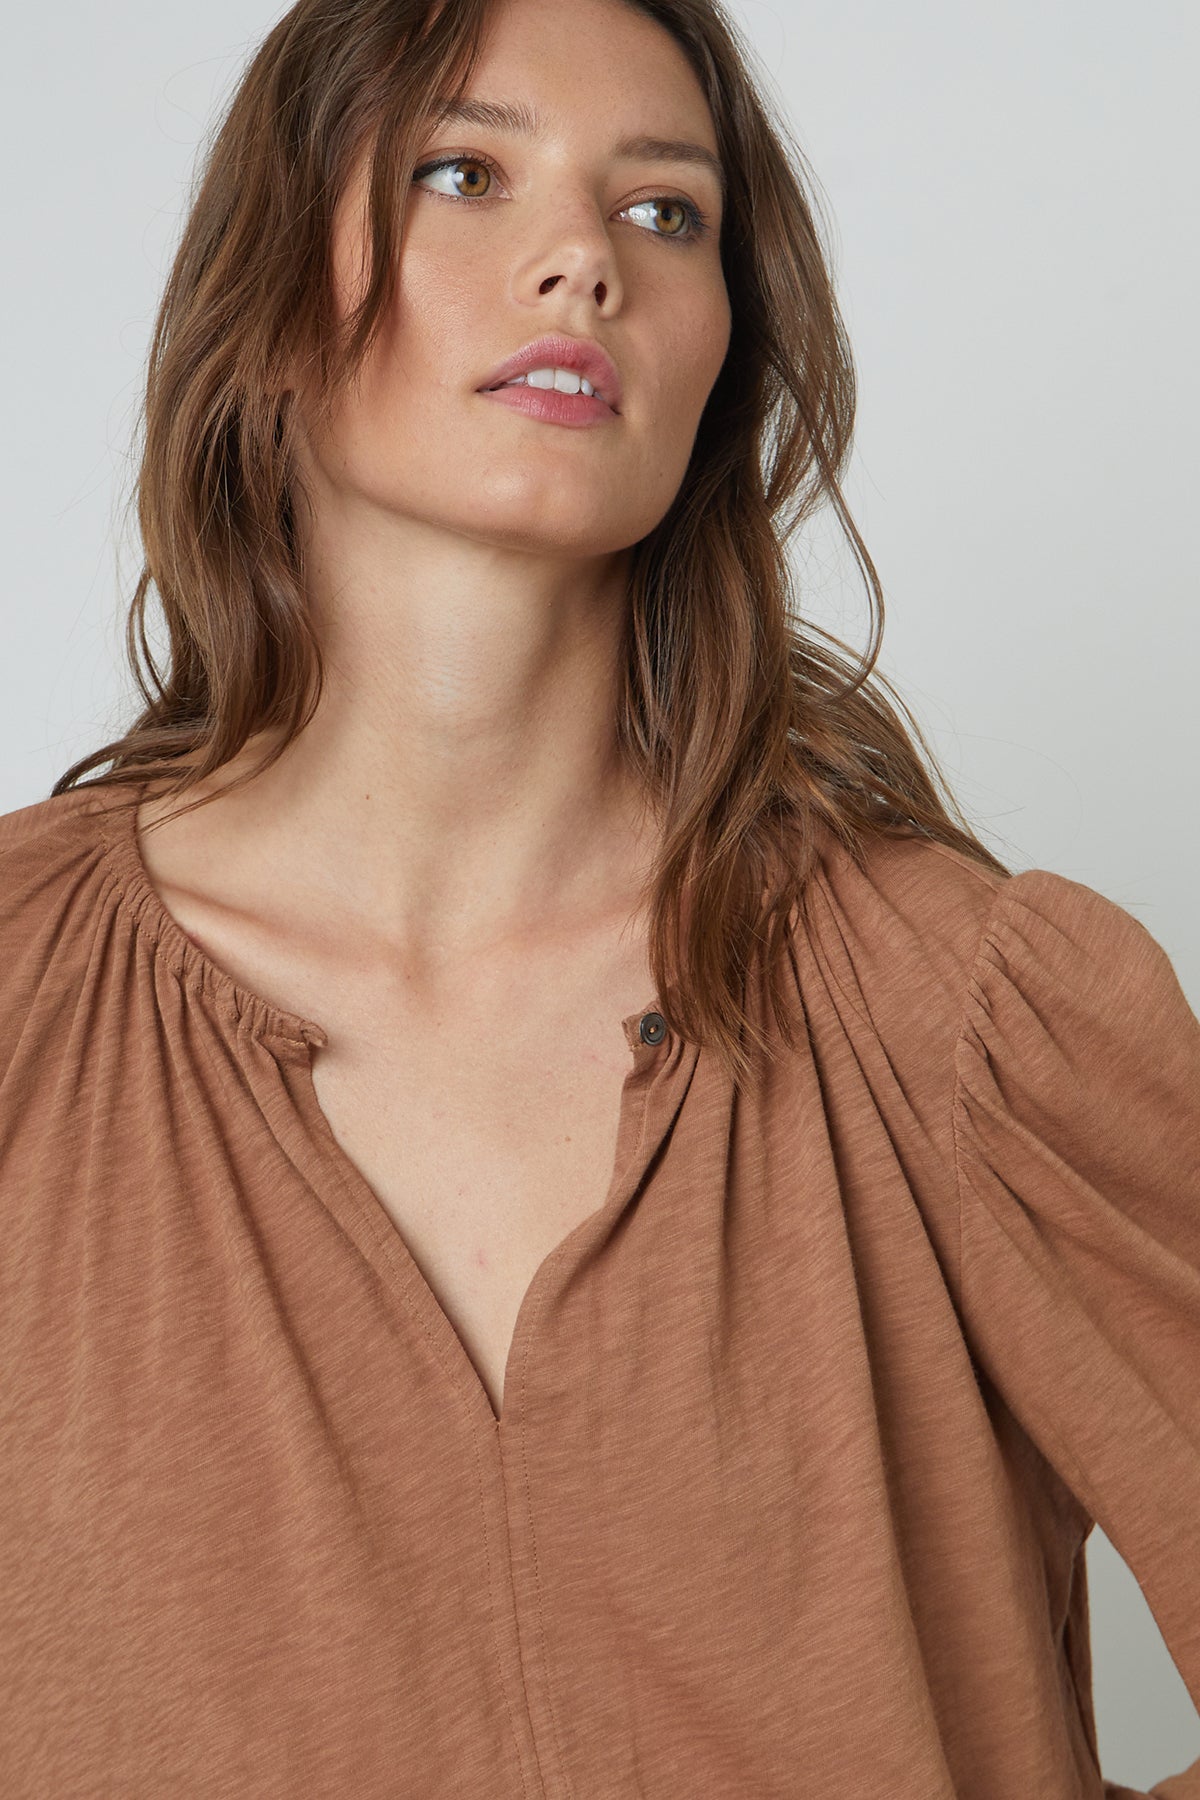 Irina Split Neck Tee in Camel close up front view-25083840299201